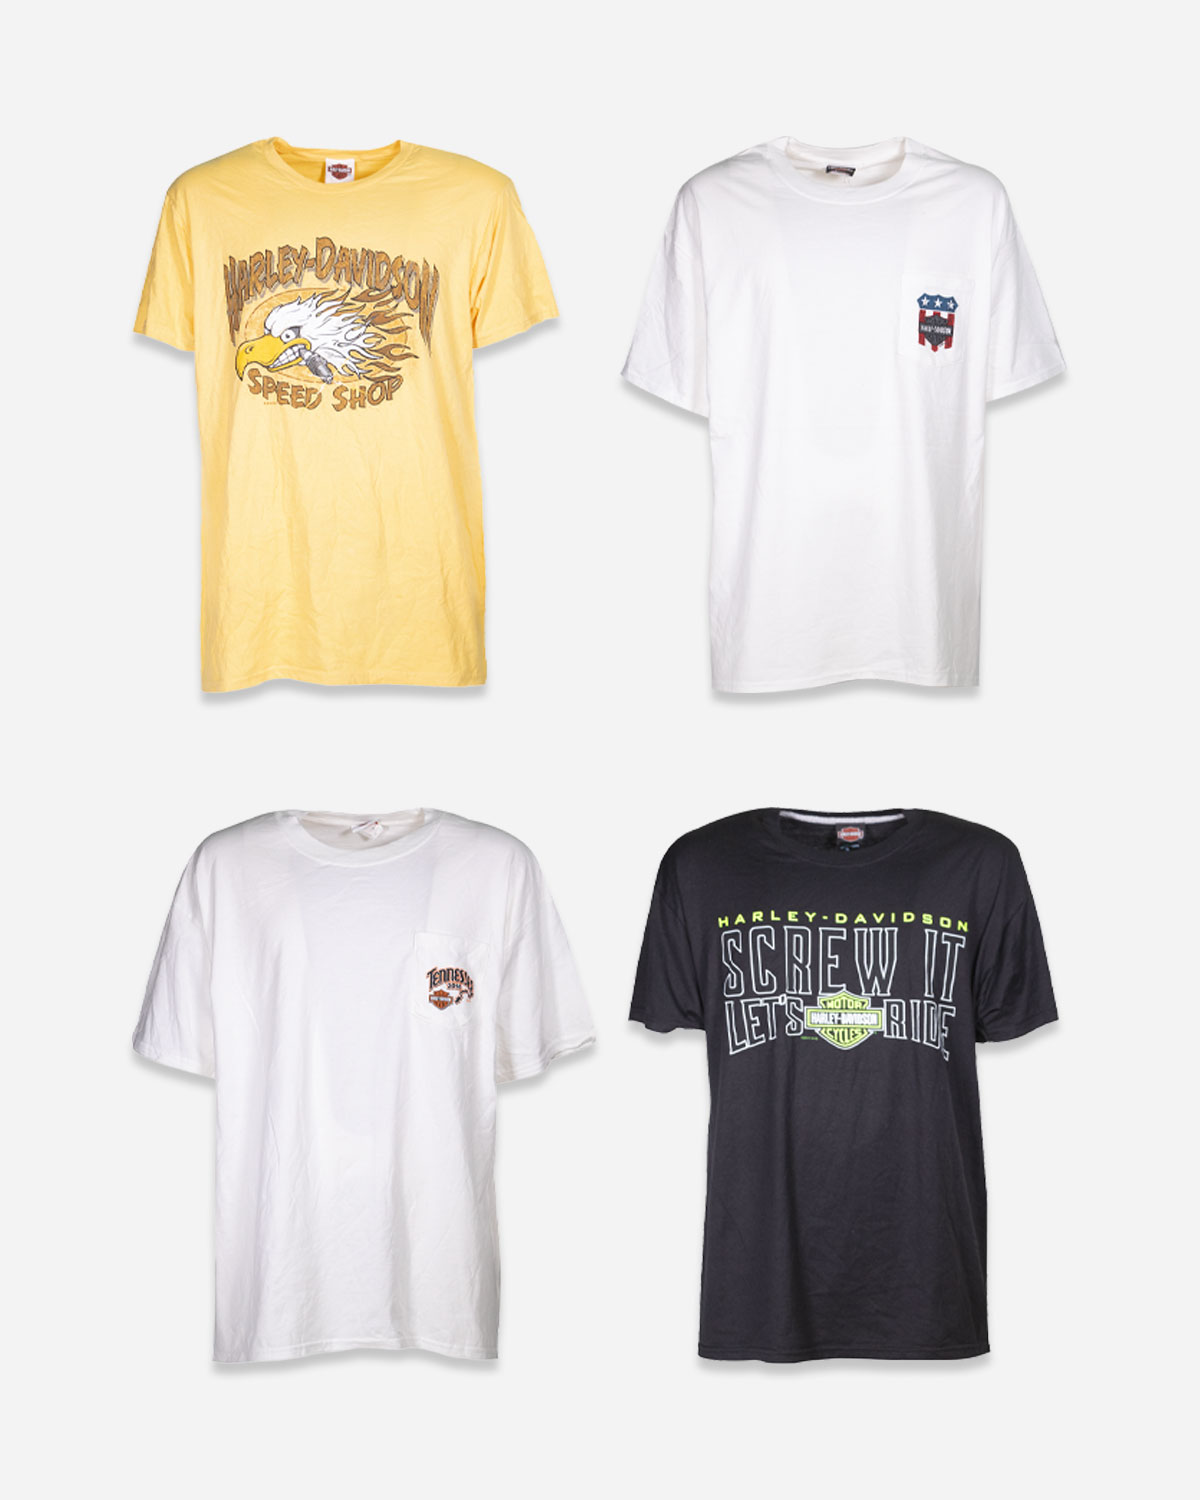 Harley Davidson t-shirts for men: 4 pieces